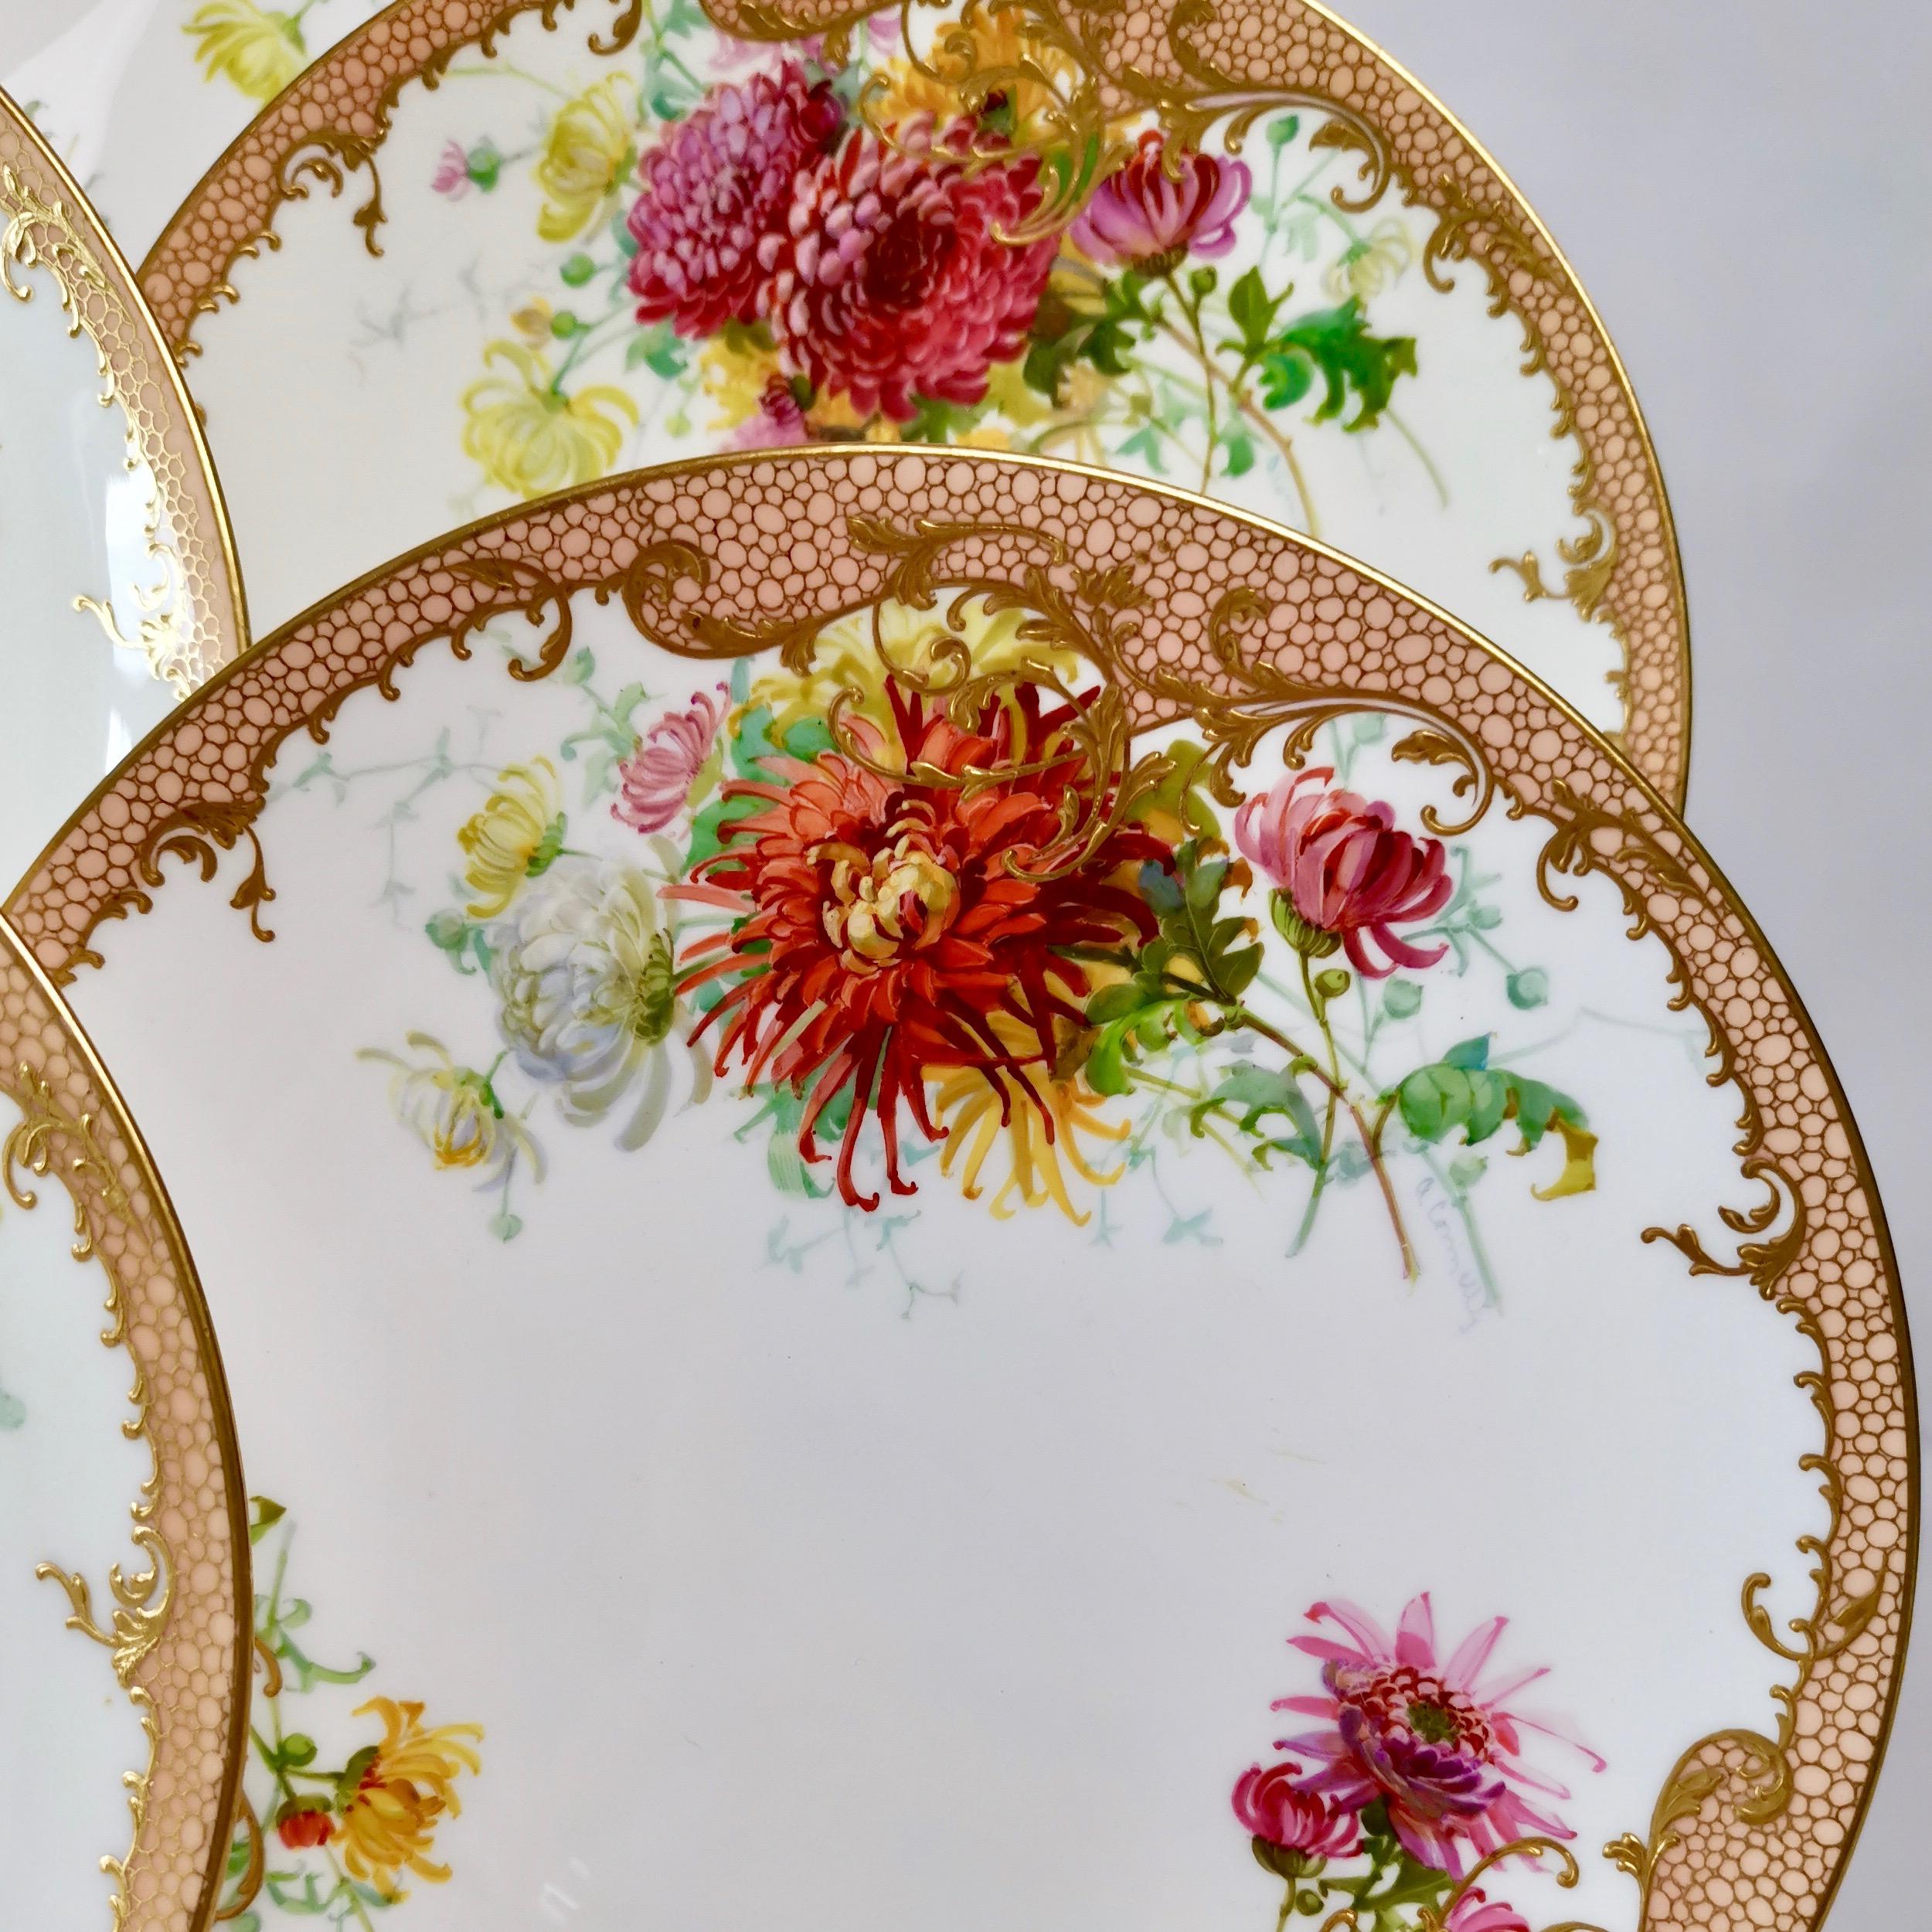 English Minton Dessert Service, Signed by Anton Connelly, circa 1894